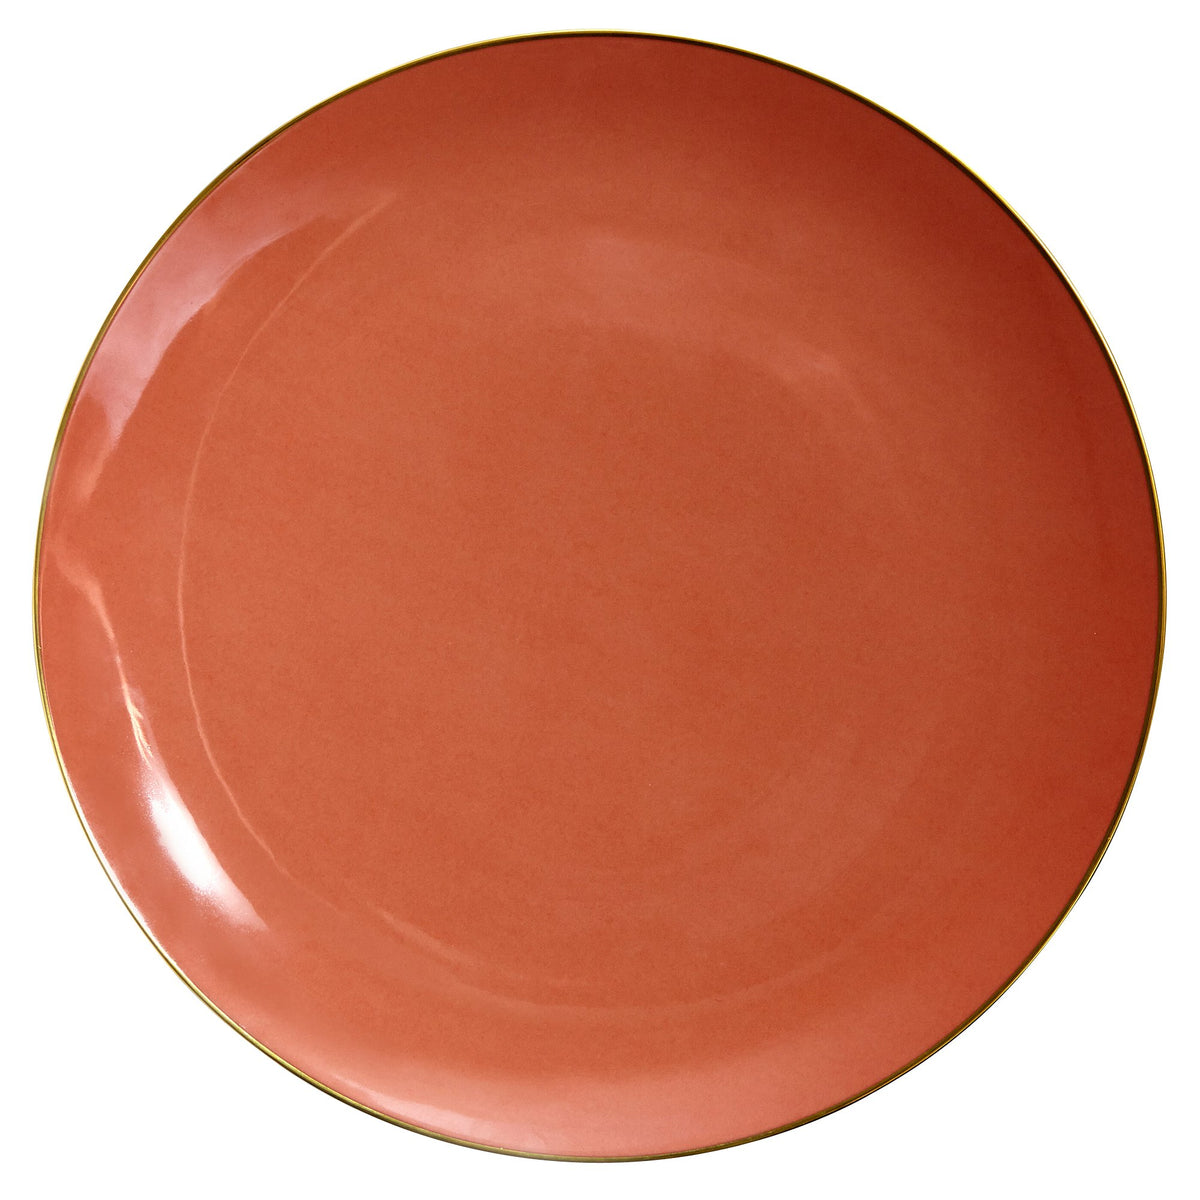 Mar Charger Plate